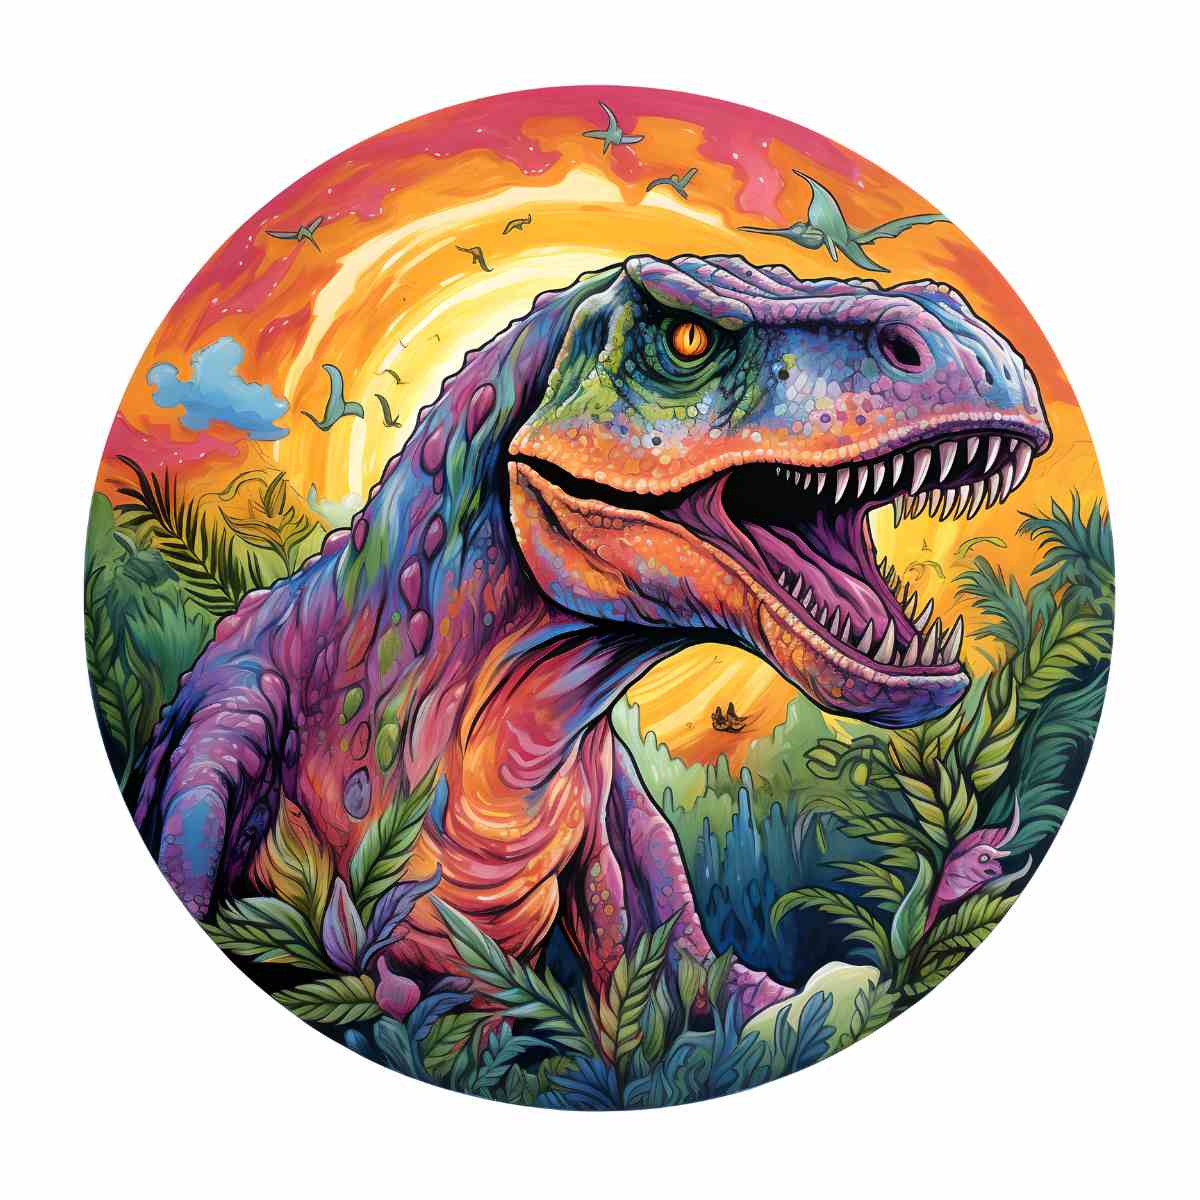 Animal Jigsaw Puzzle > Wooden Jigsaw Puzzle > Jigsaw Puzzle A5 Dinosaur - Jigsaw Puzzle